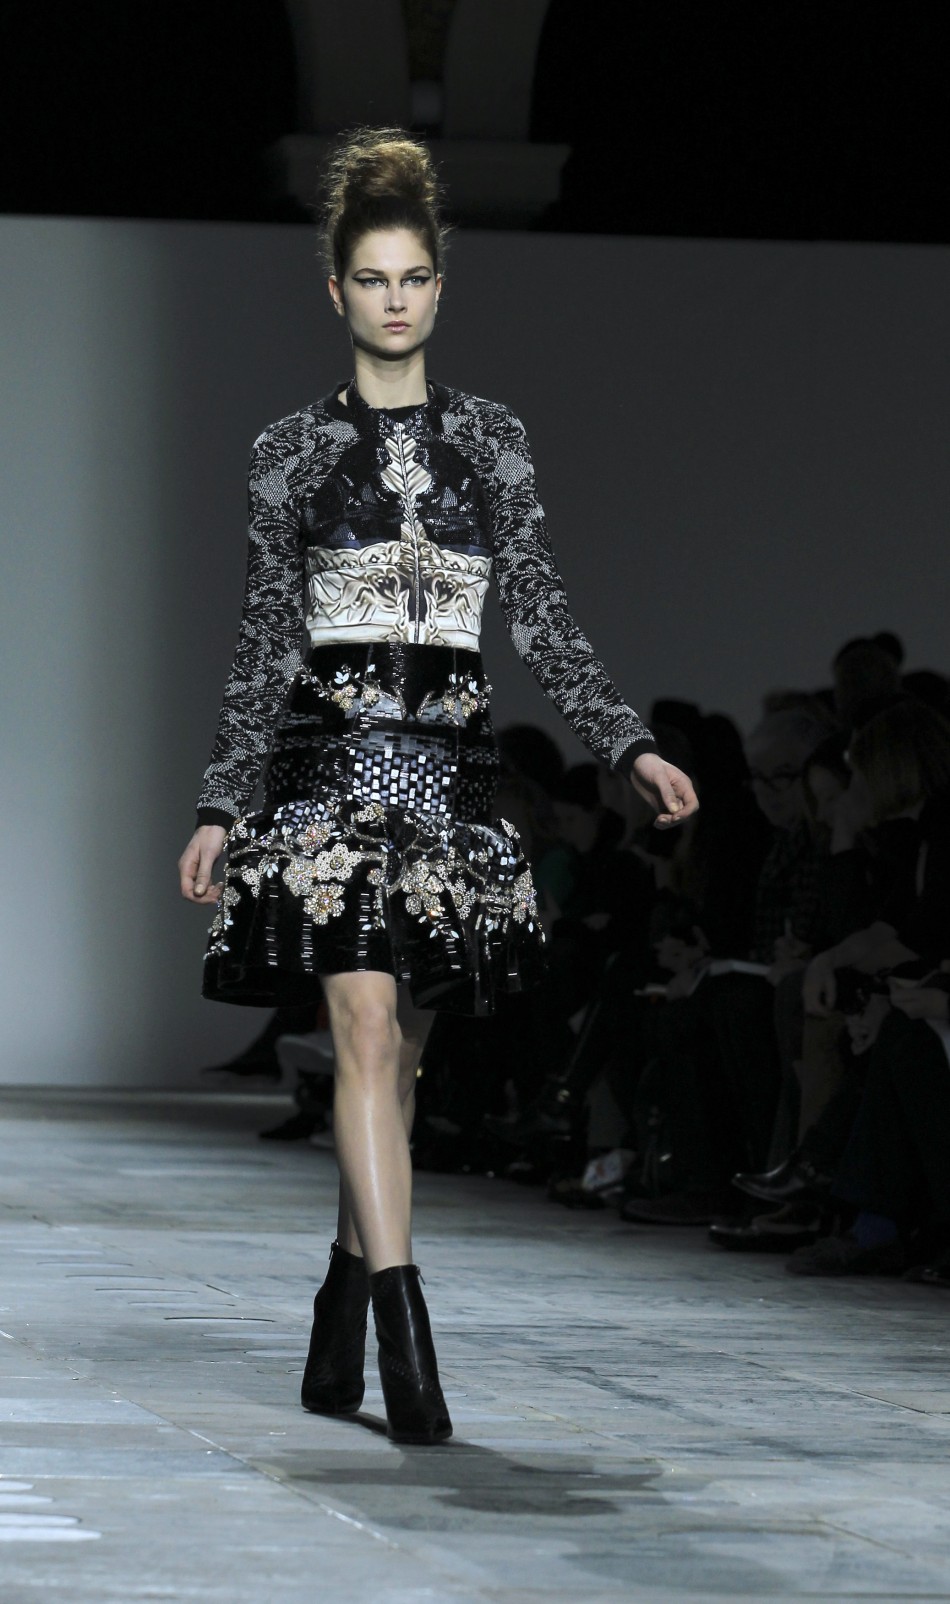 Eclectic Designs and Experimental Patterns Mark Mary Katrantzou LFW Collection